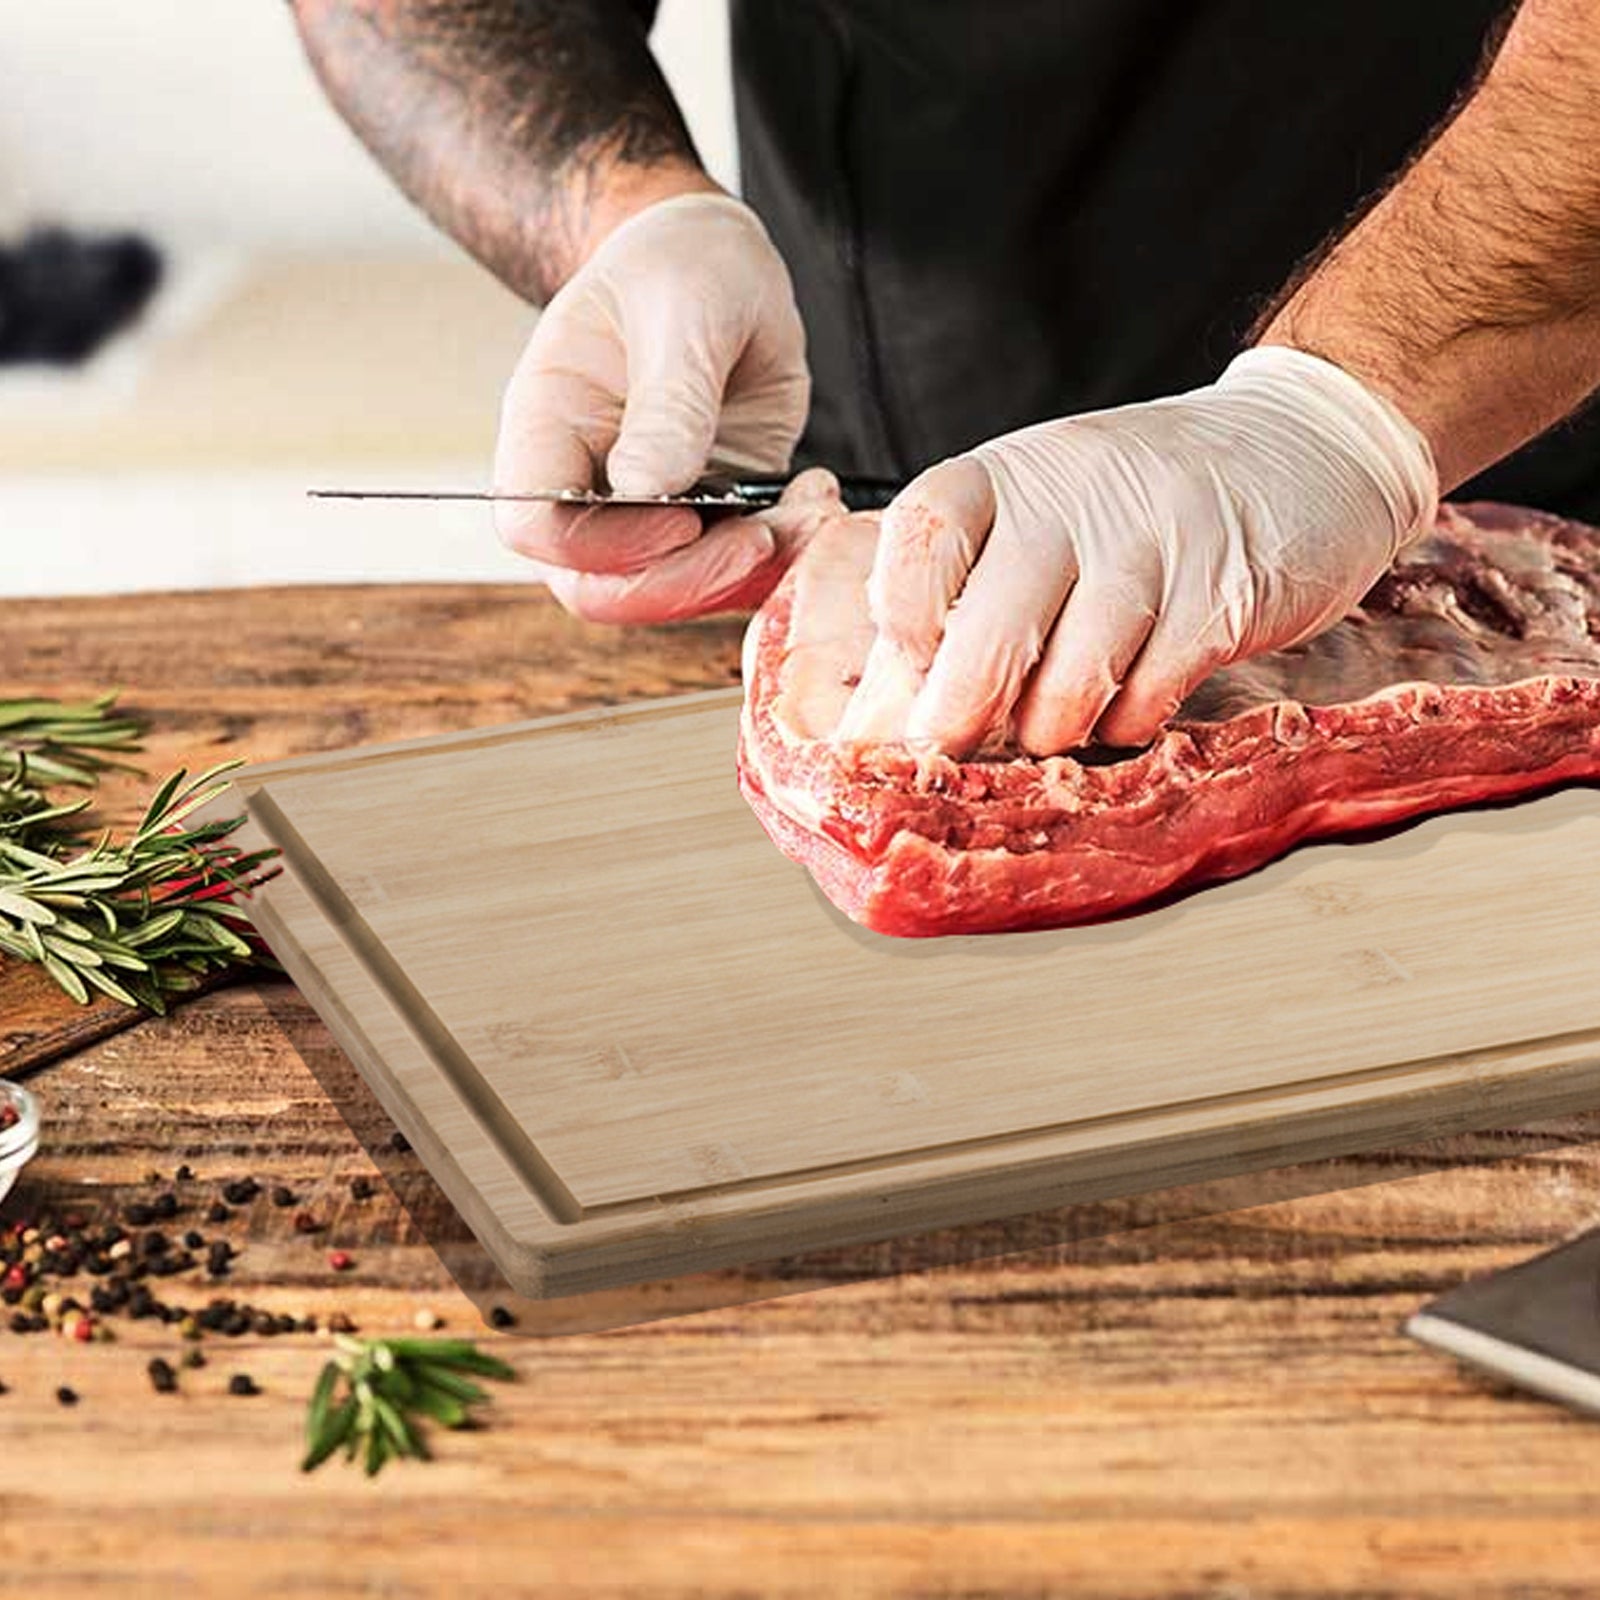 The Best Cutting Board for Raw Meat